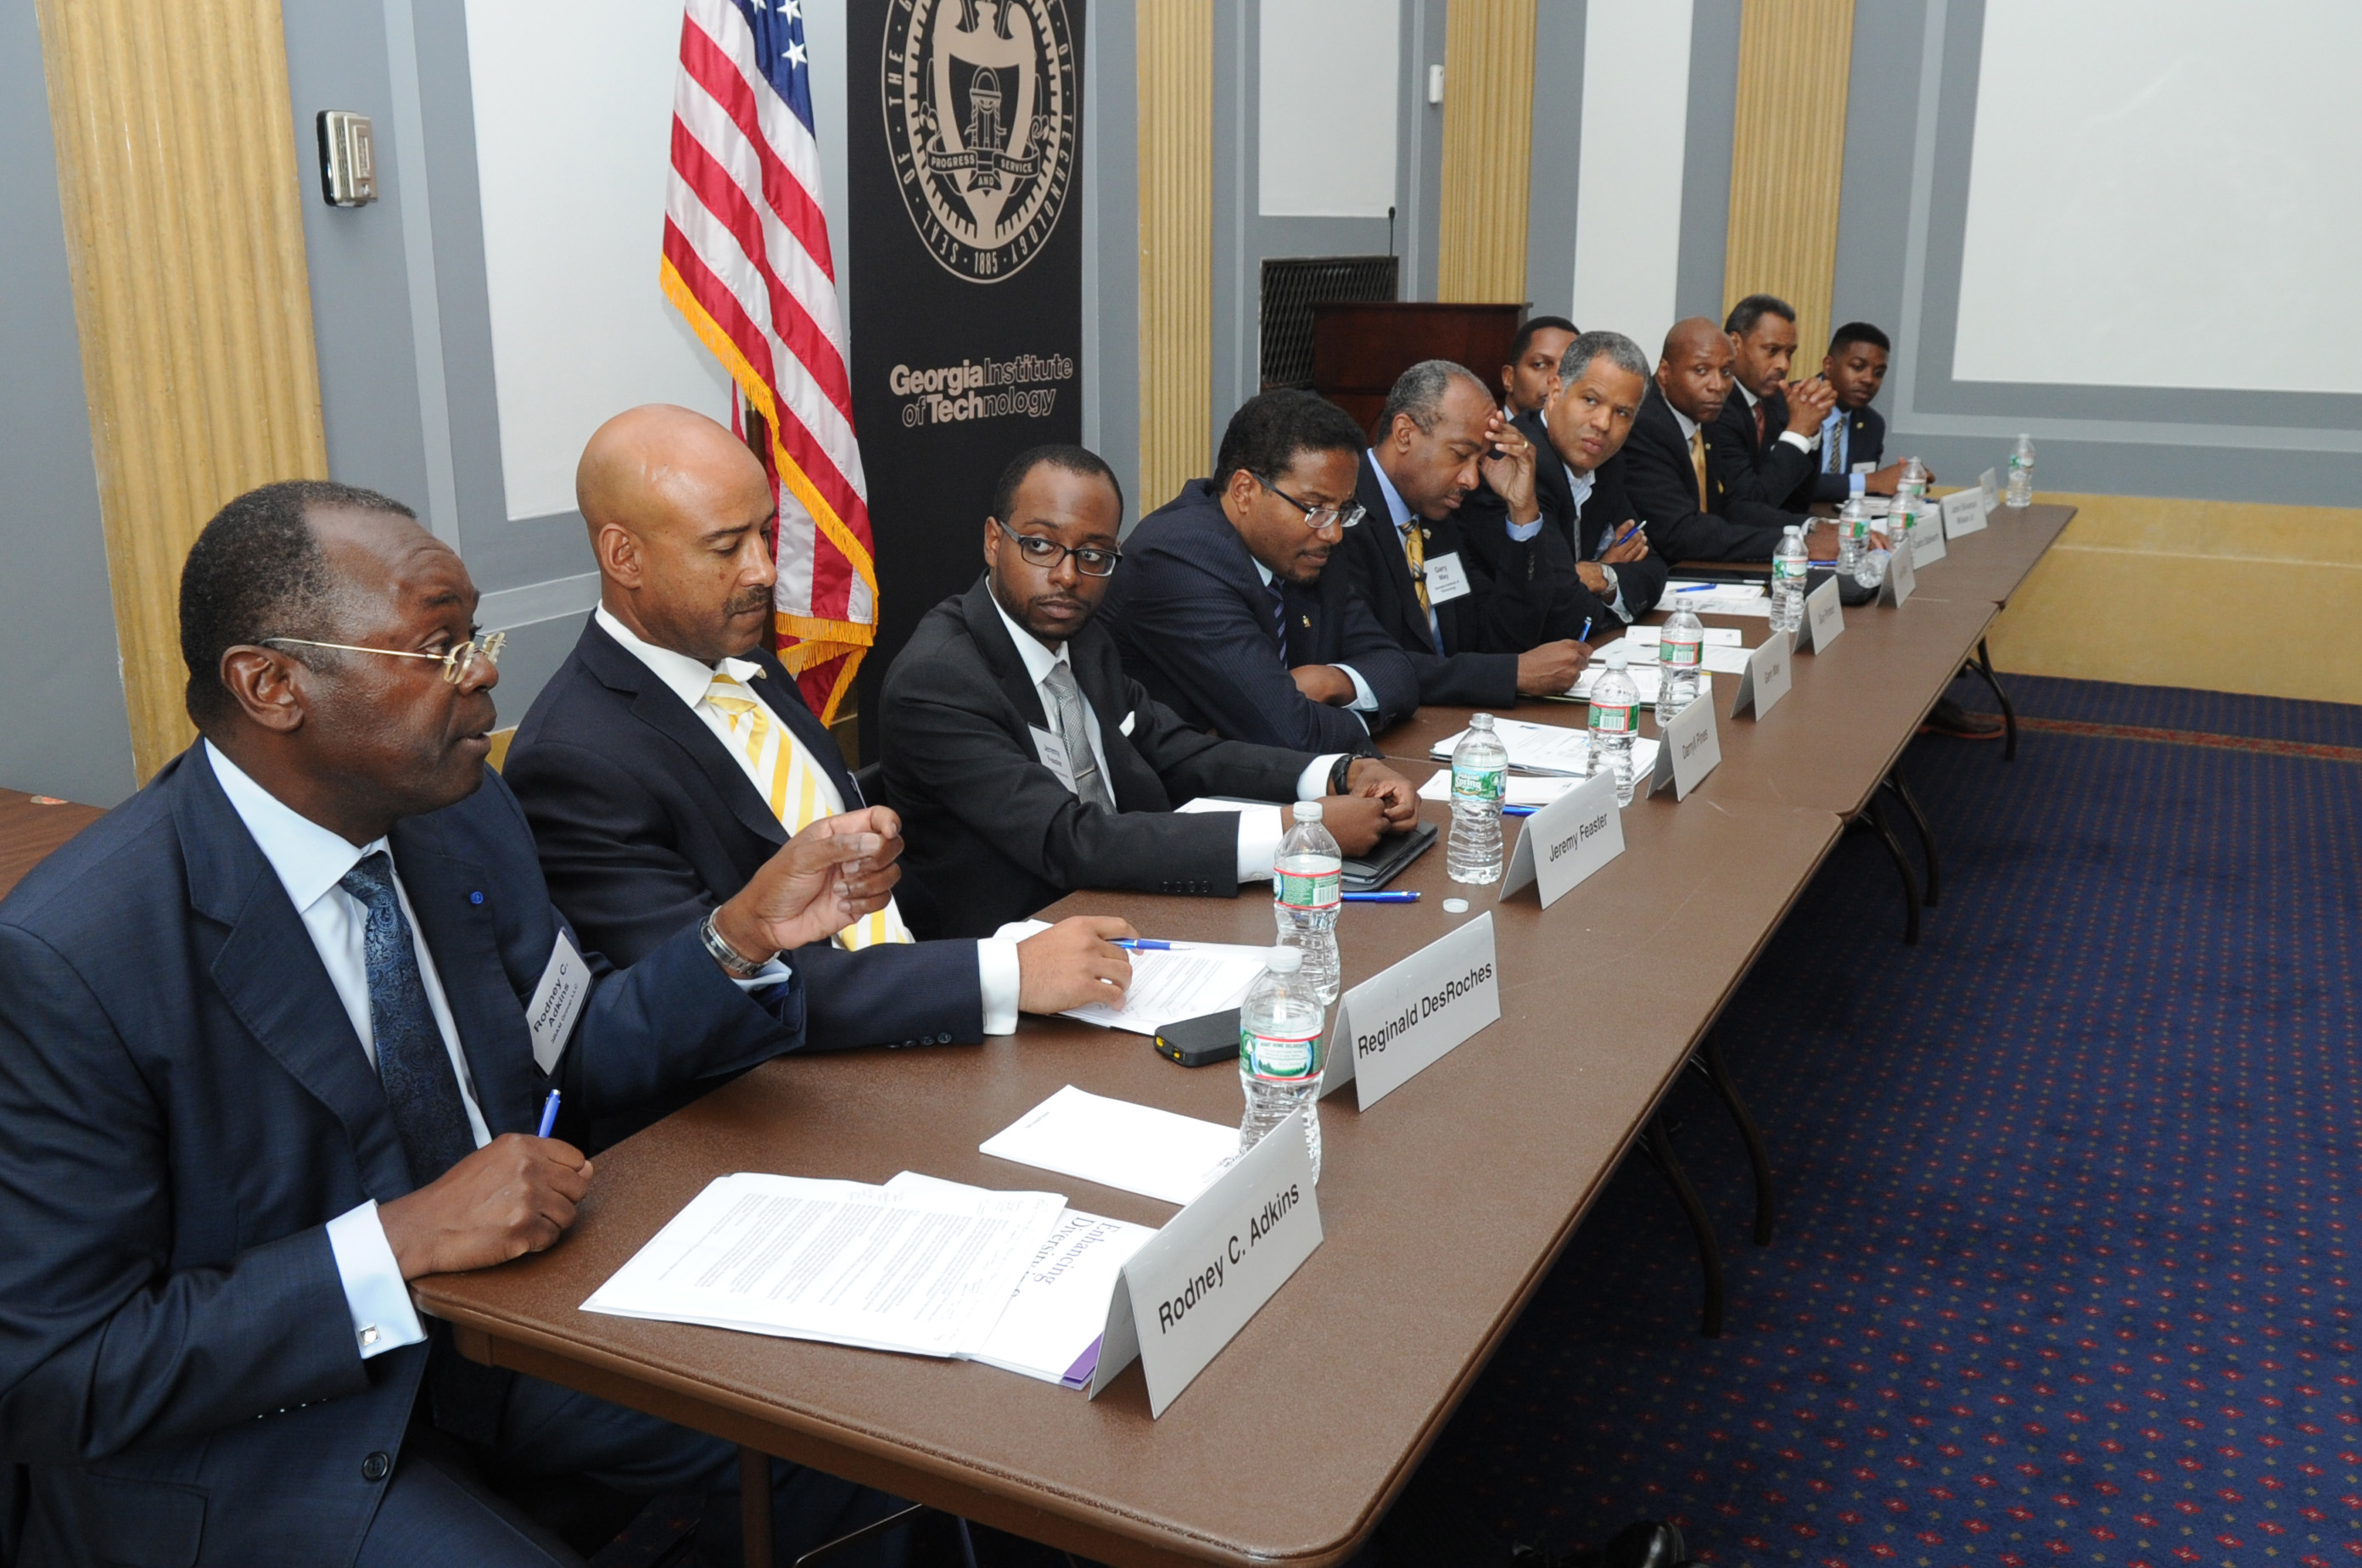 National event held in Washington, D.C., examined how to attract more African-American men to STEM and how to support those already working in these careers